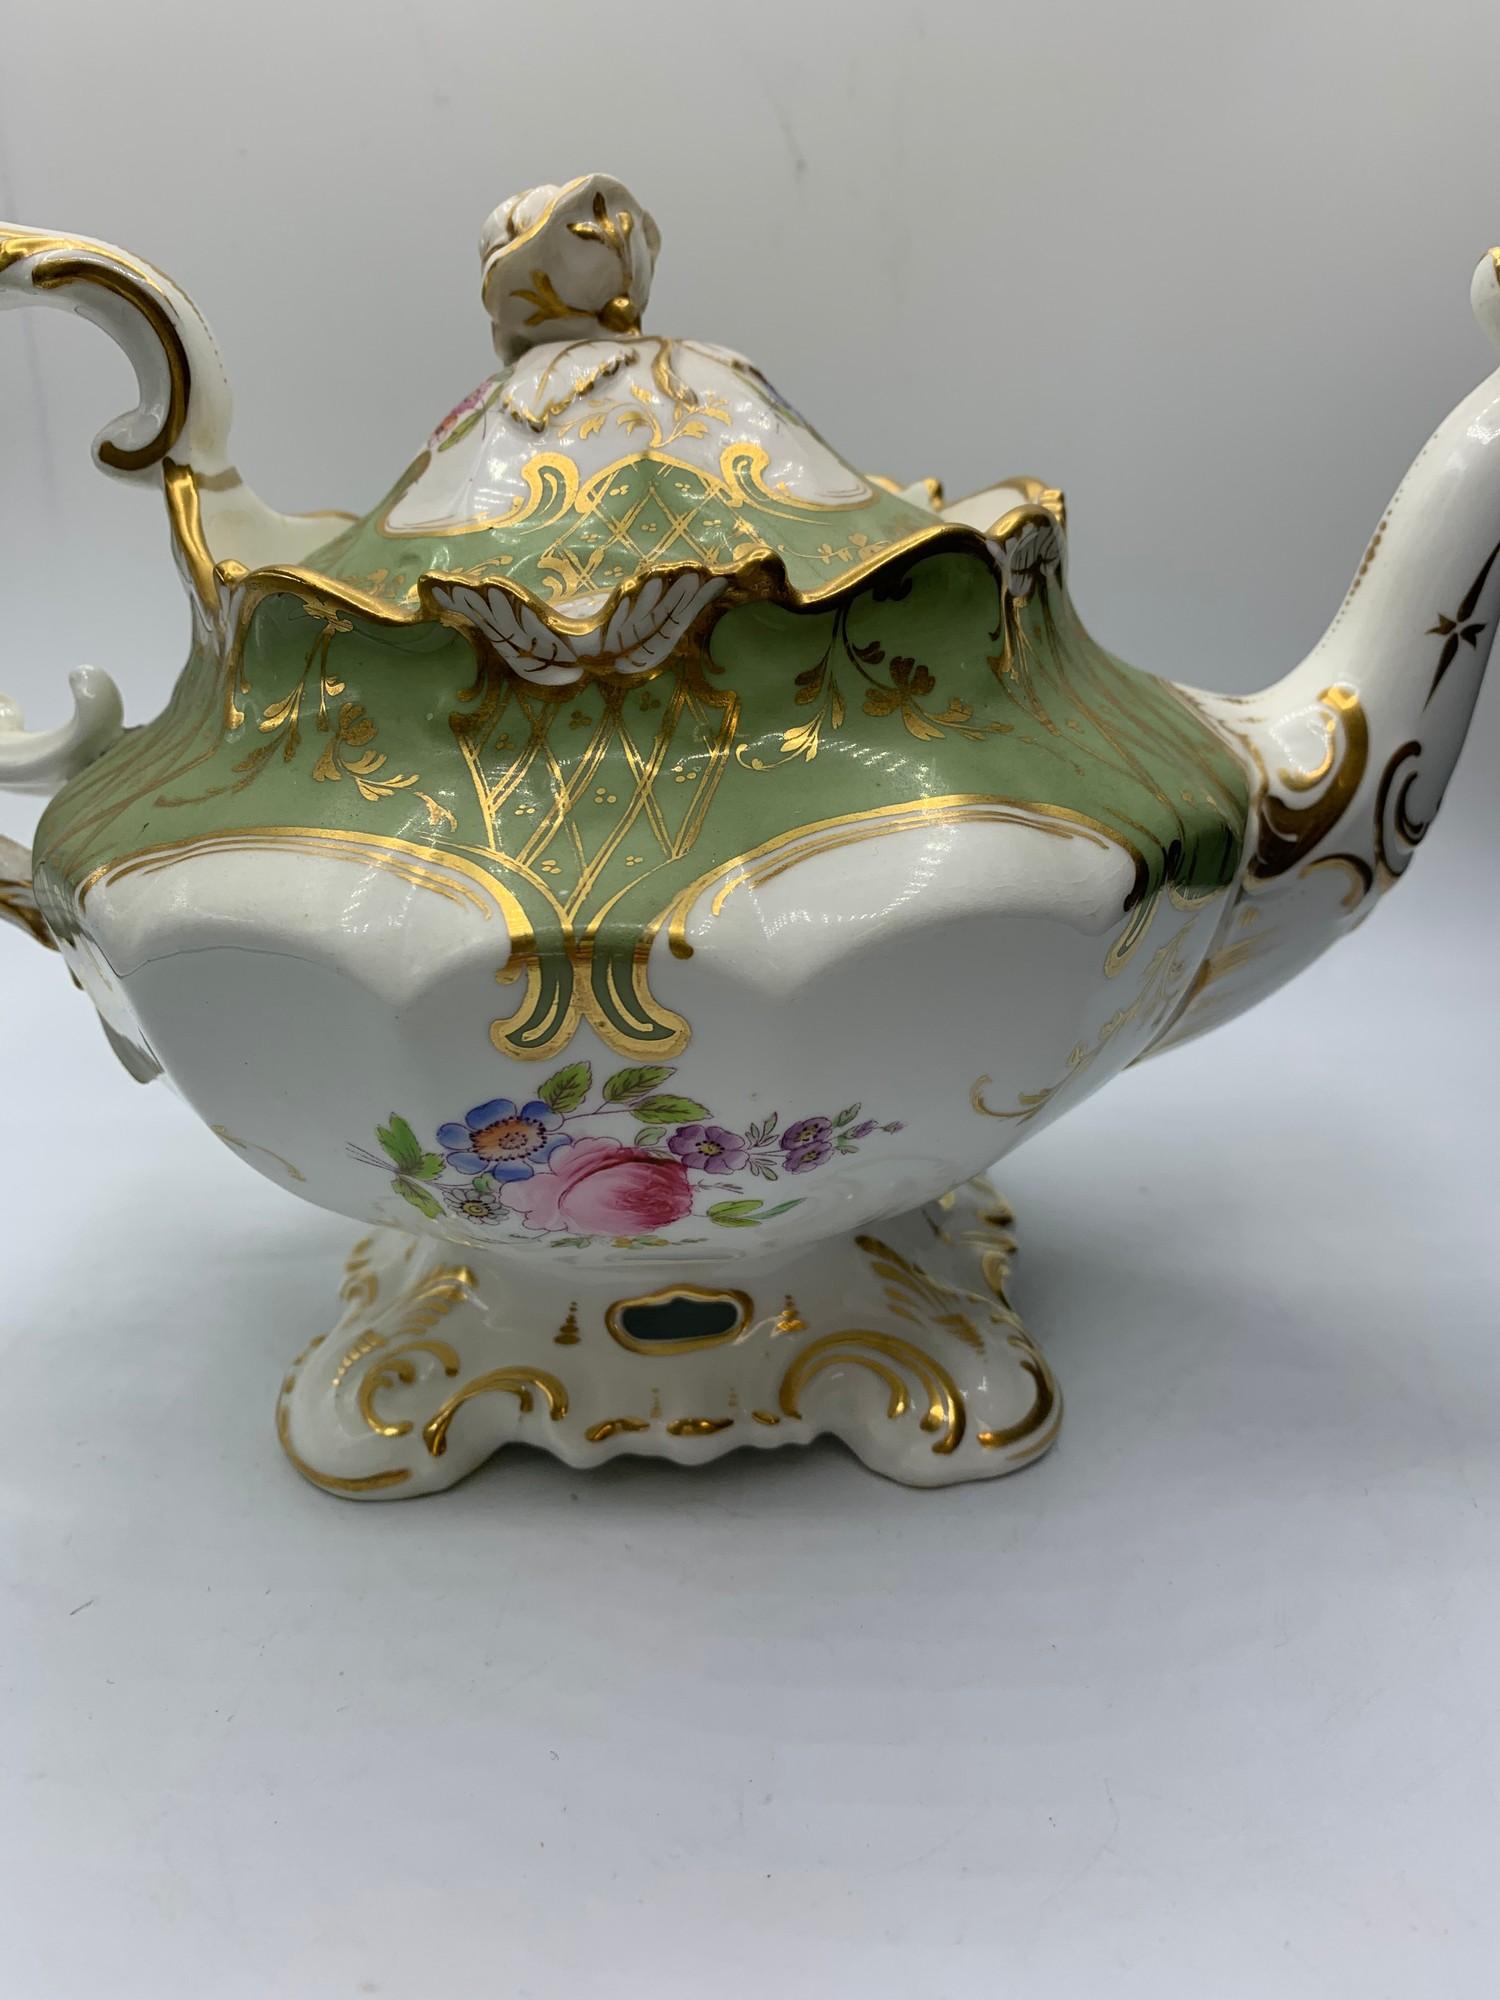 H&R Daniel second bell shape Teapot in good Rococo style with slanted rose on lid in good condition - Image 3 of 6